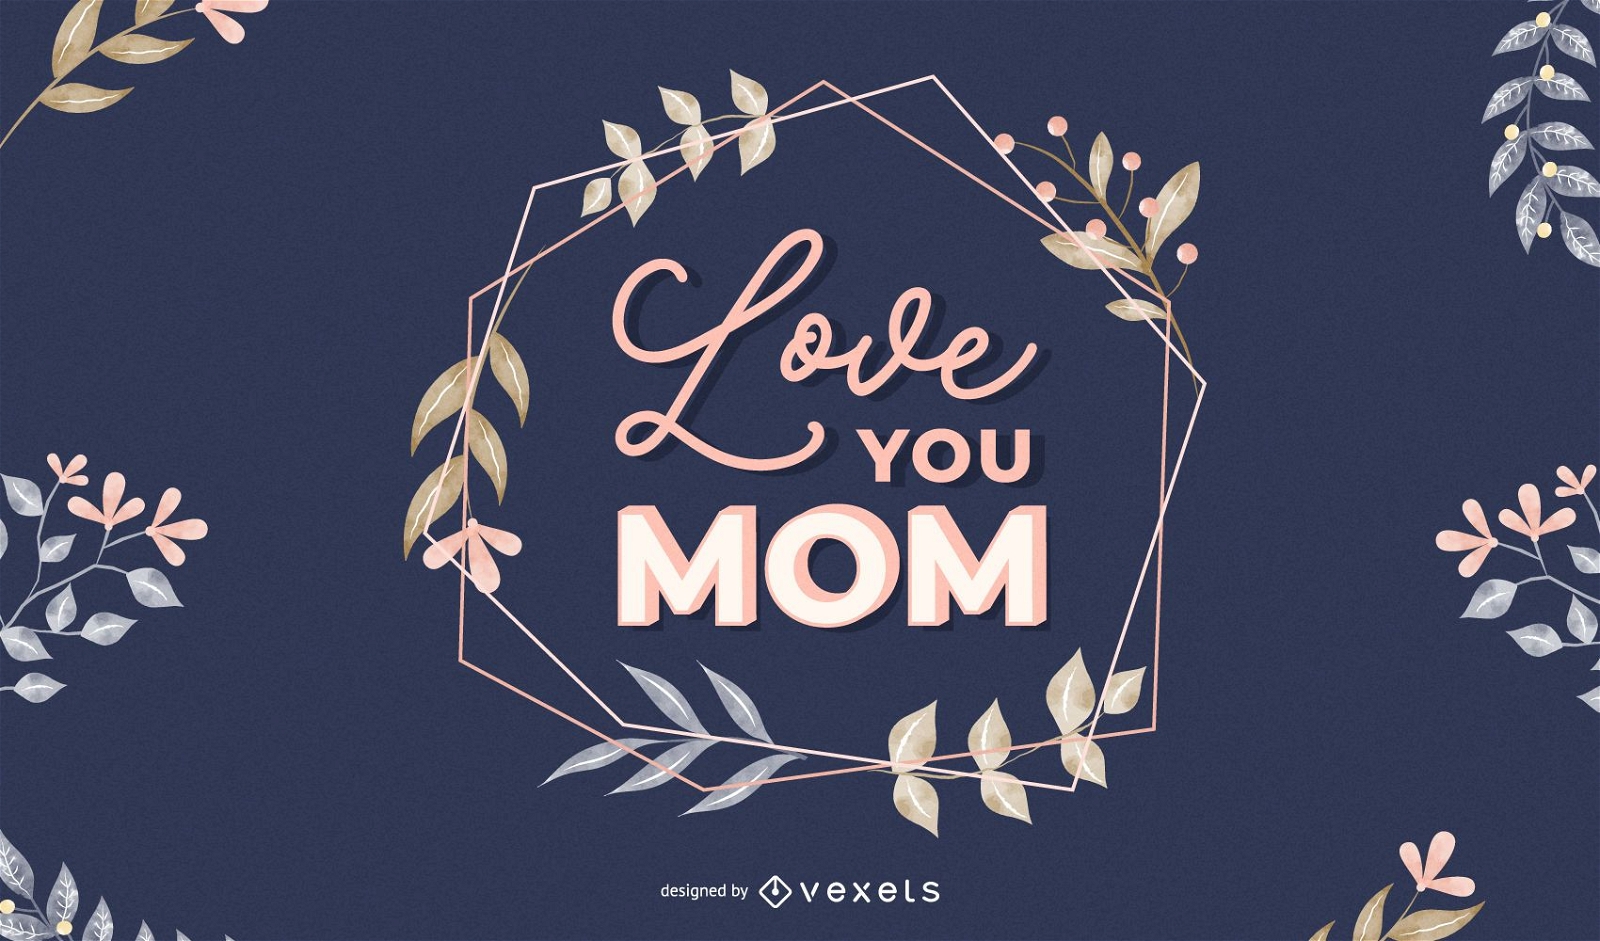 Love you mom lettering